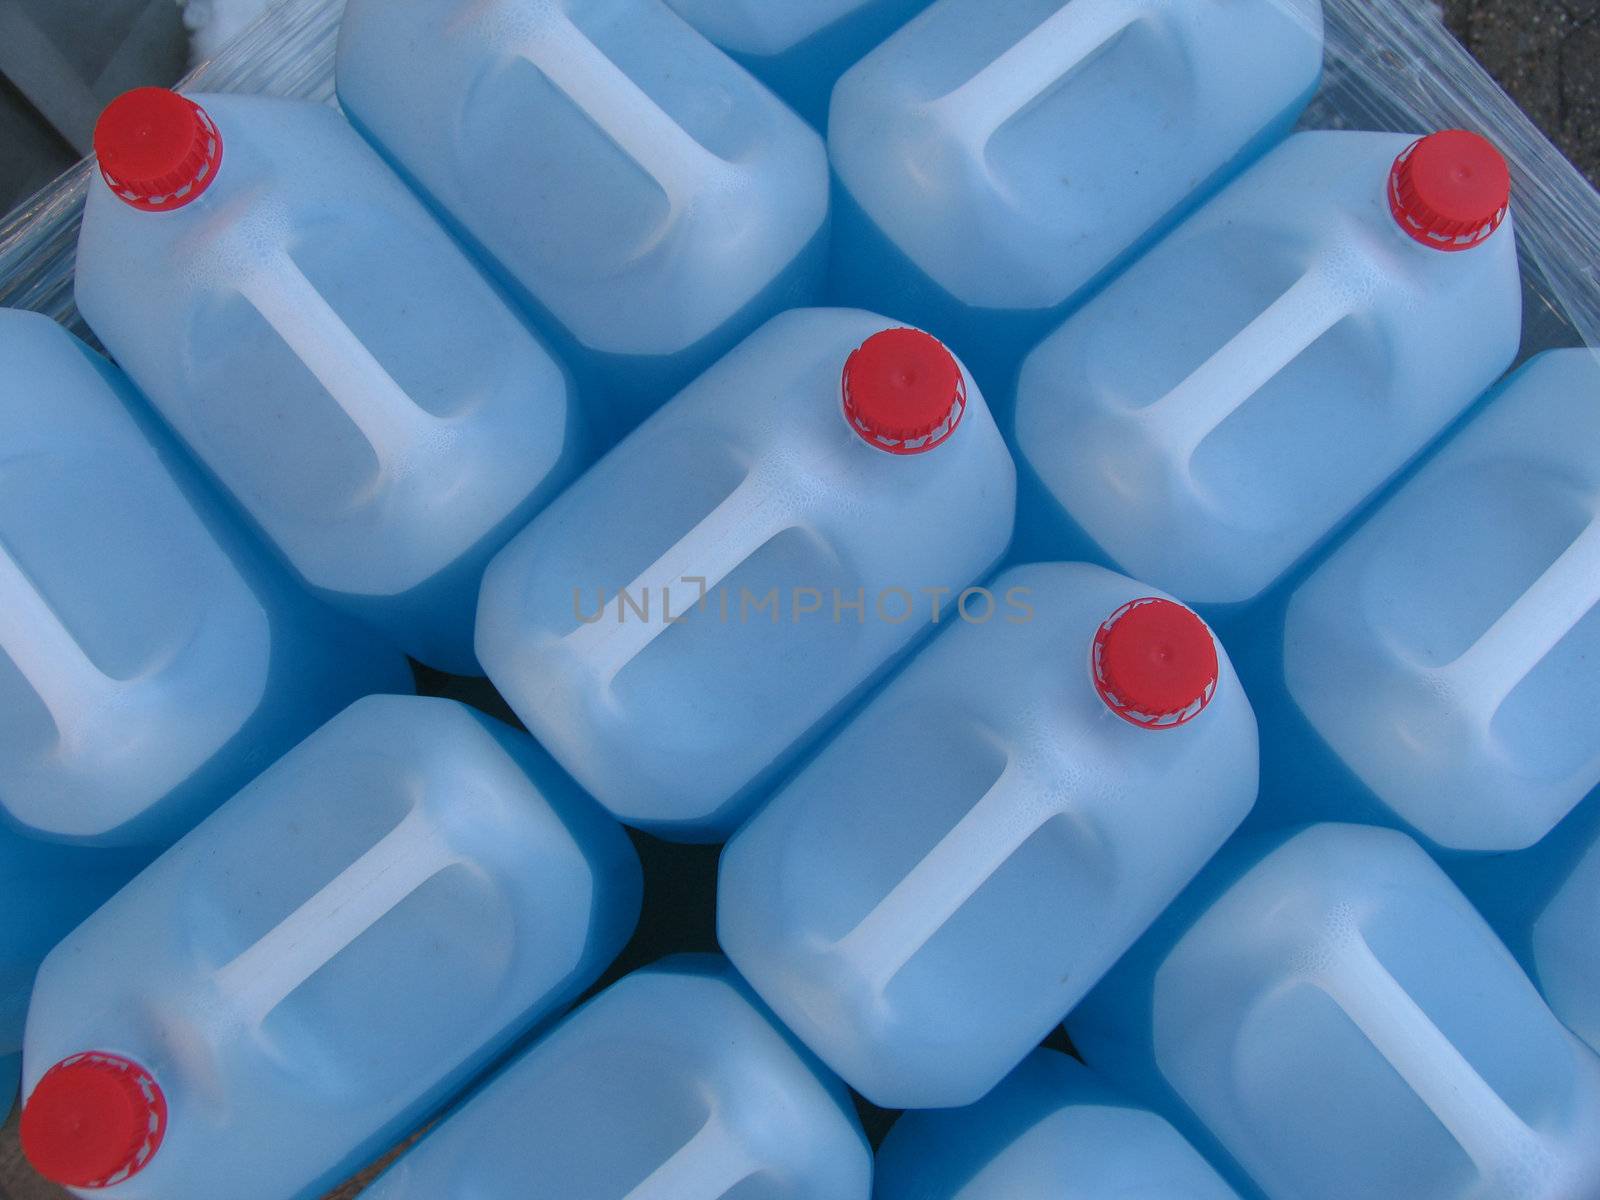 Plastic containers with blue liquid. Windshield washer fluid (water and alcohol) for winter use in Scandinavia. 